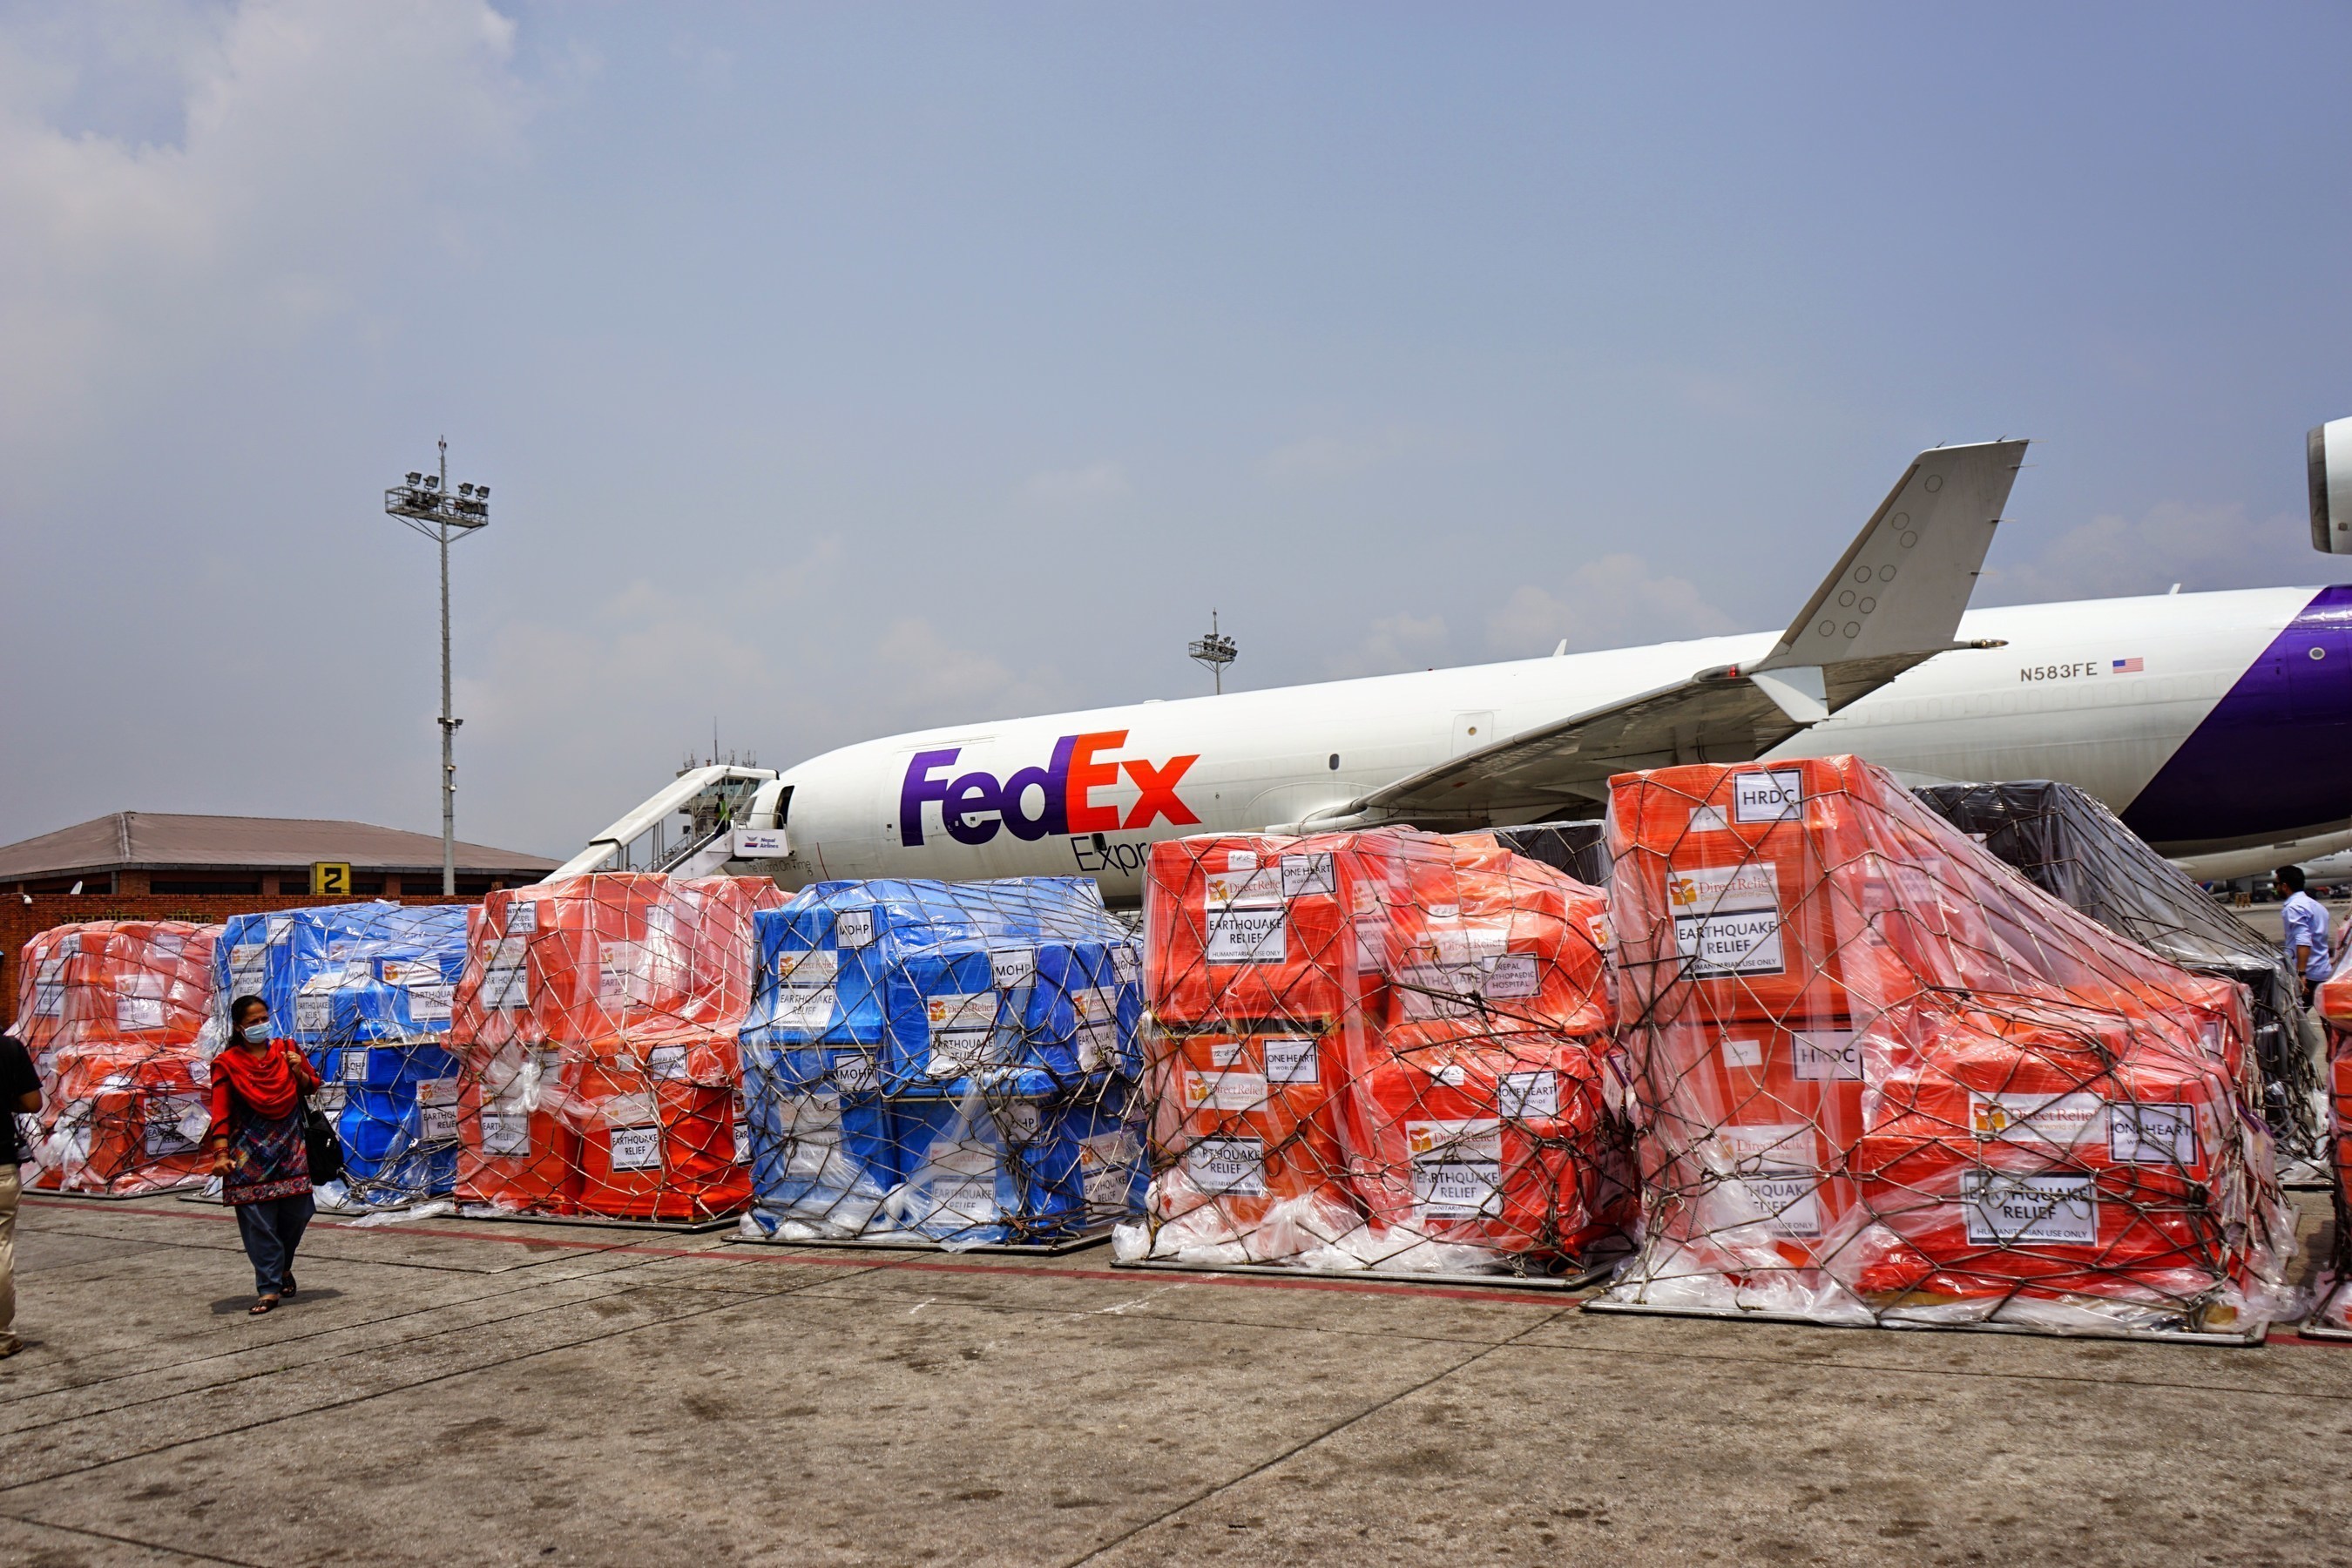 Nepal Earthquake Response: Medical aid pallets from Direct Relief unloaded from cargo flight donated by FedEx. 5.9.15.